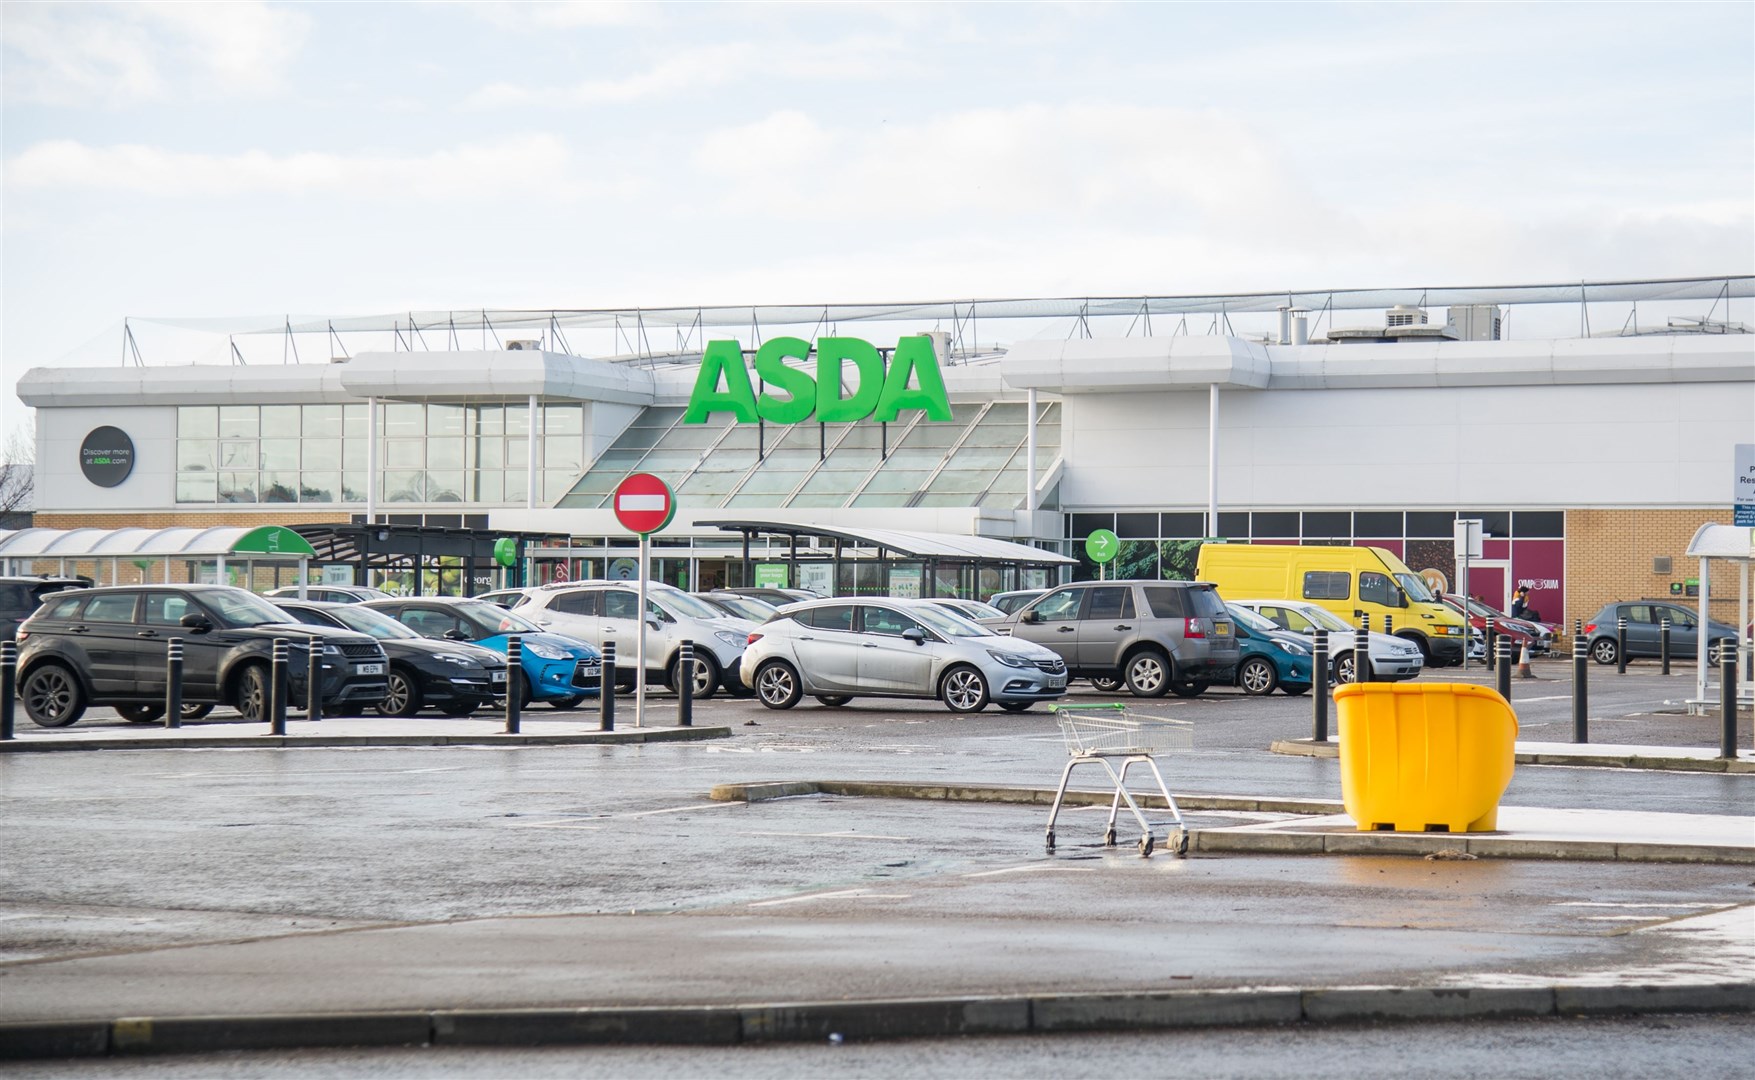 Asda Superstore, Elgin, where Arrows are hosting today's event. Picture: Becky Saunderson